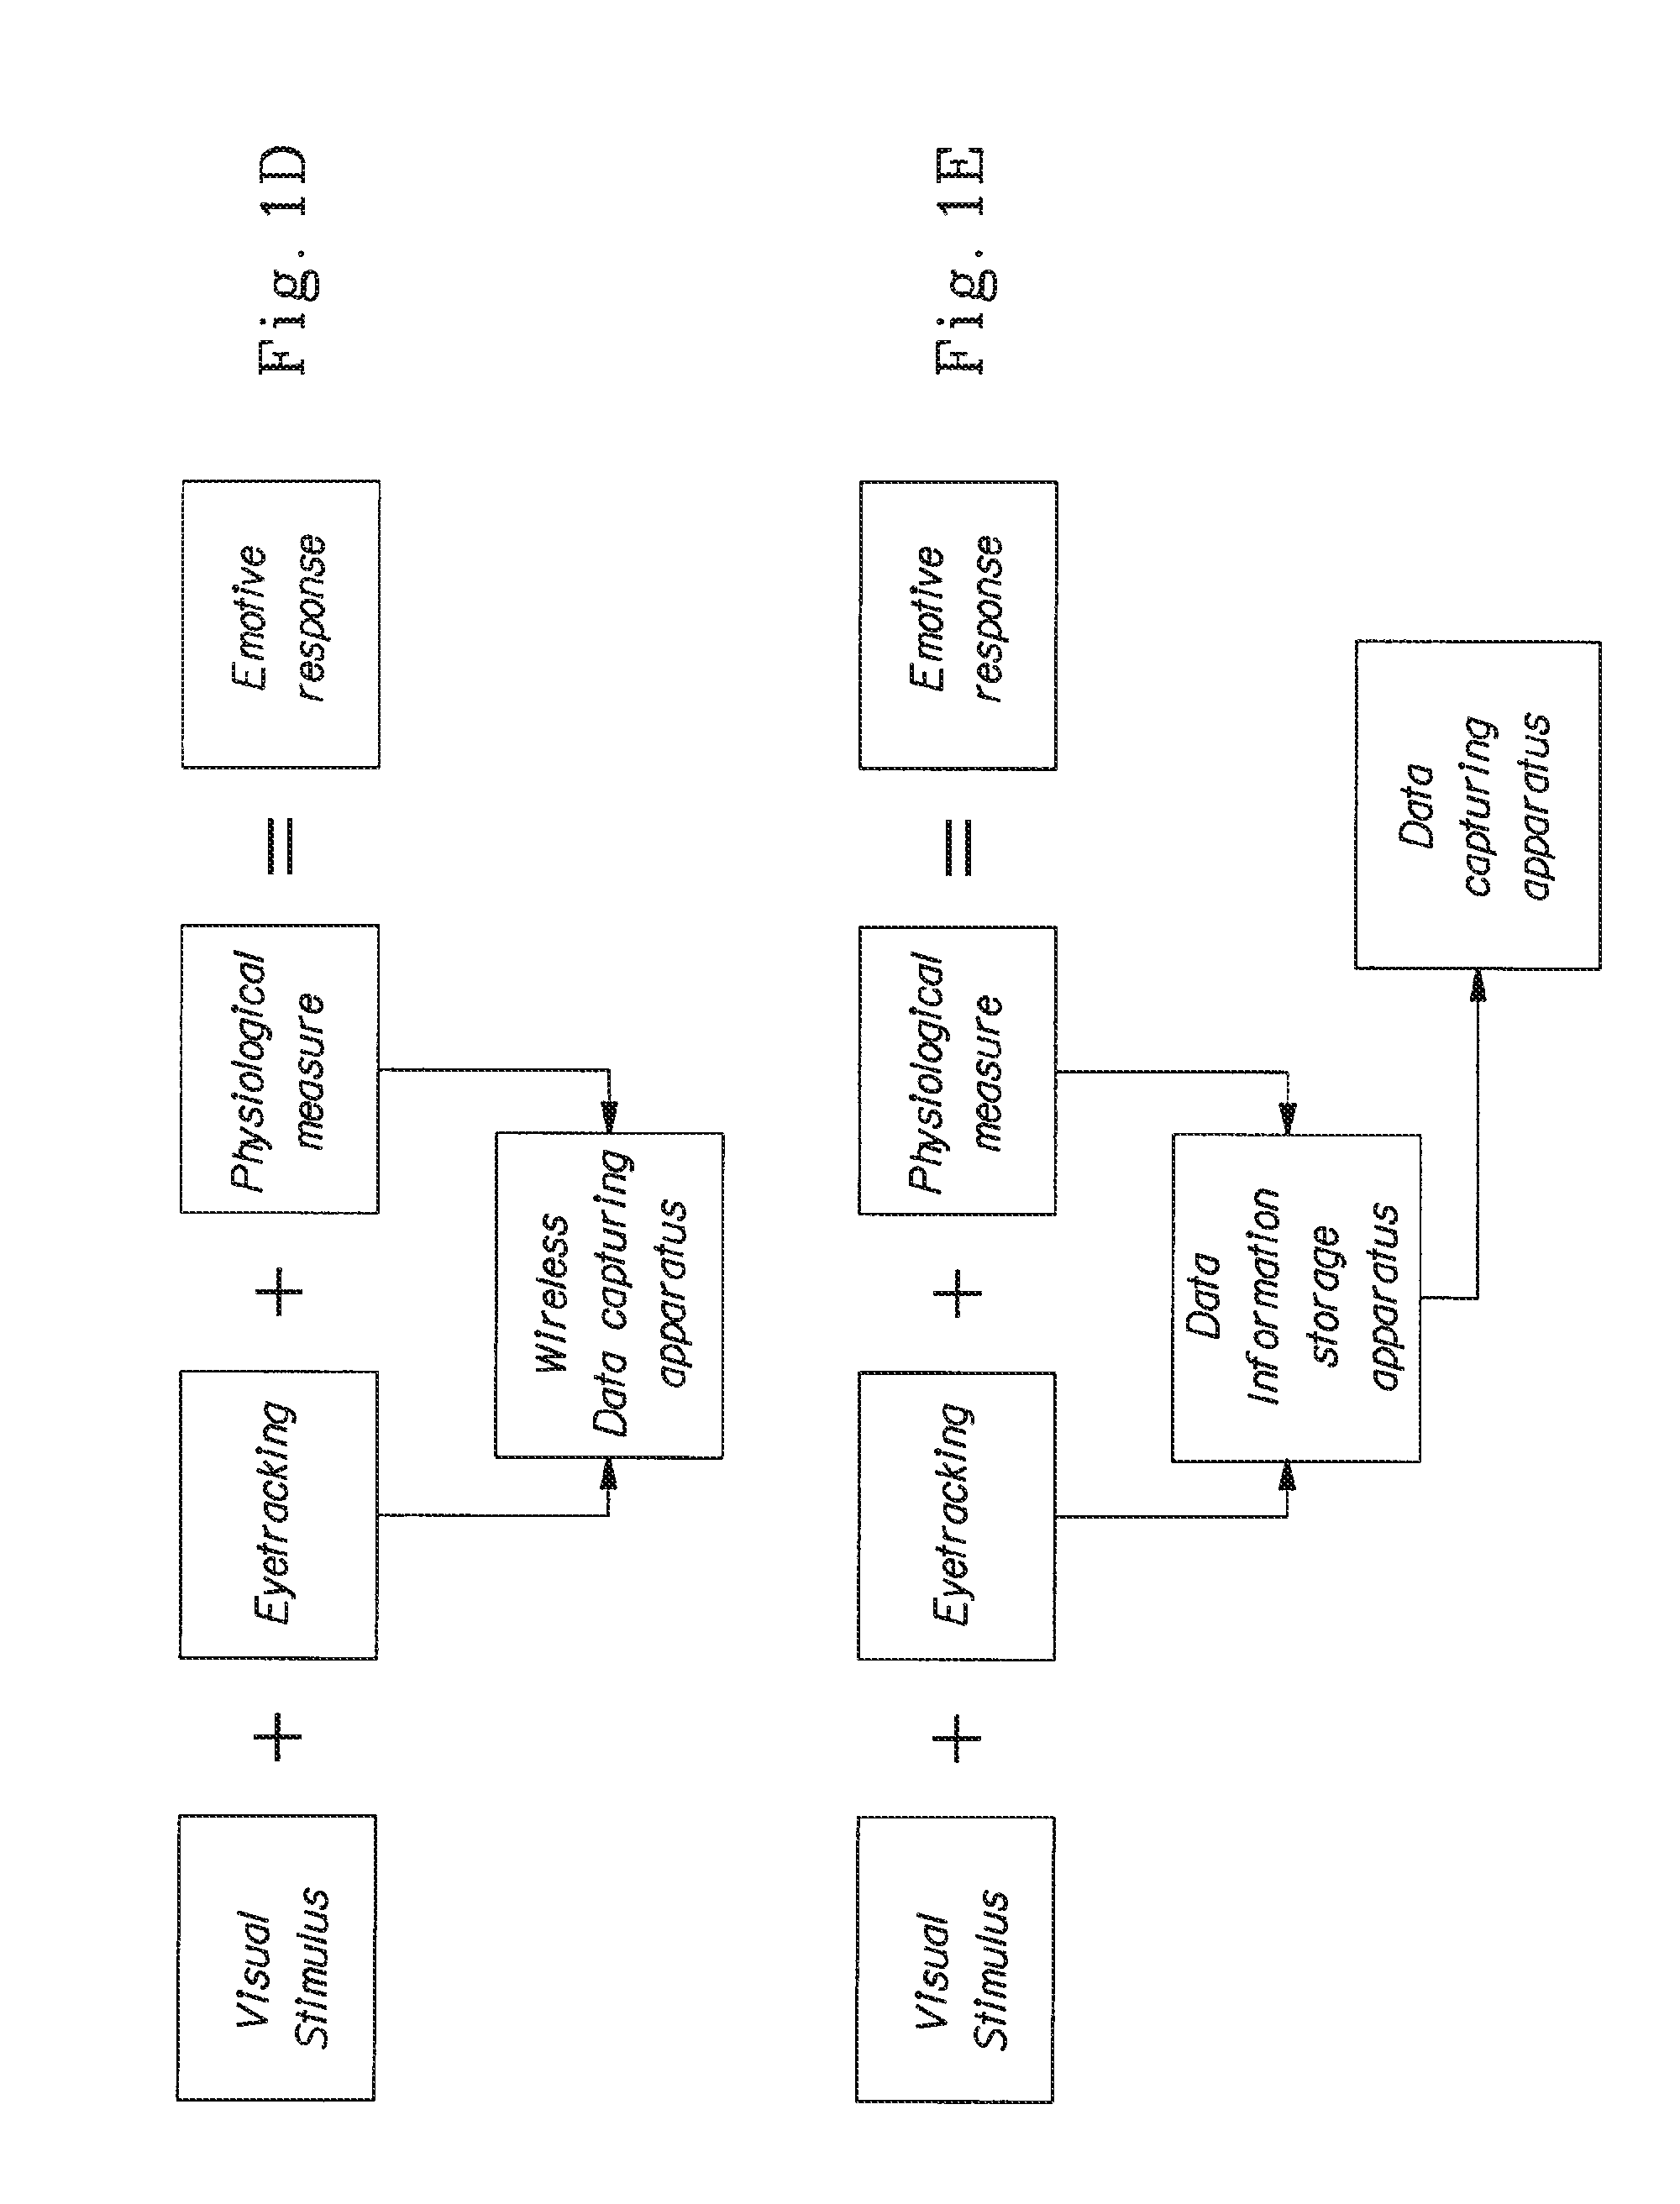 Methods for Measuring Emotive Response and Selection Preference